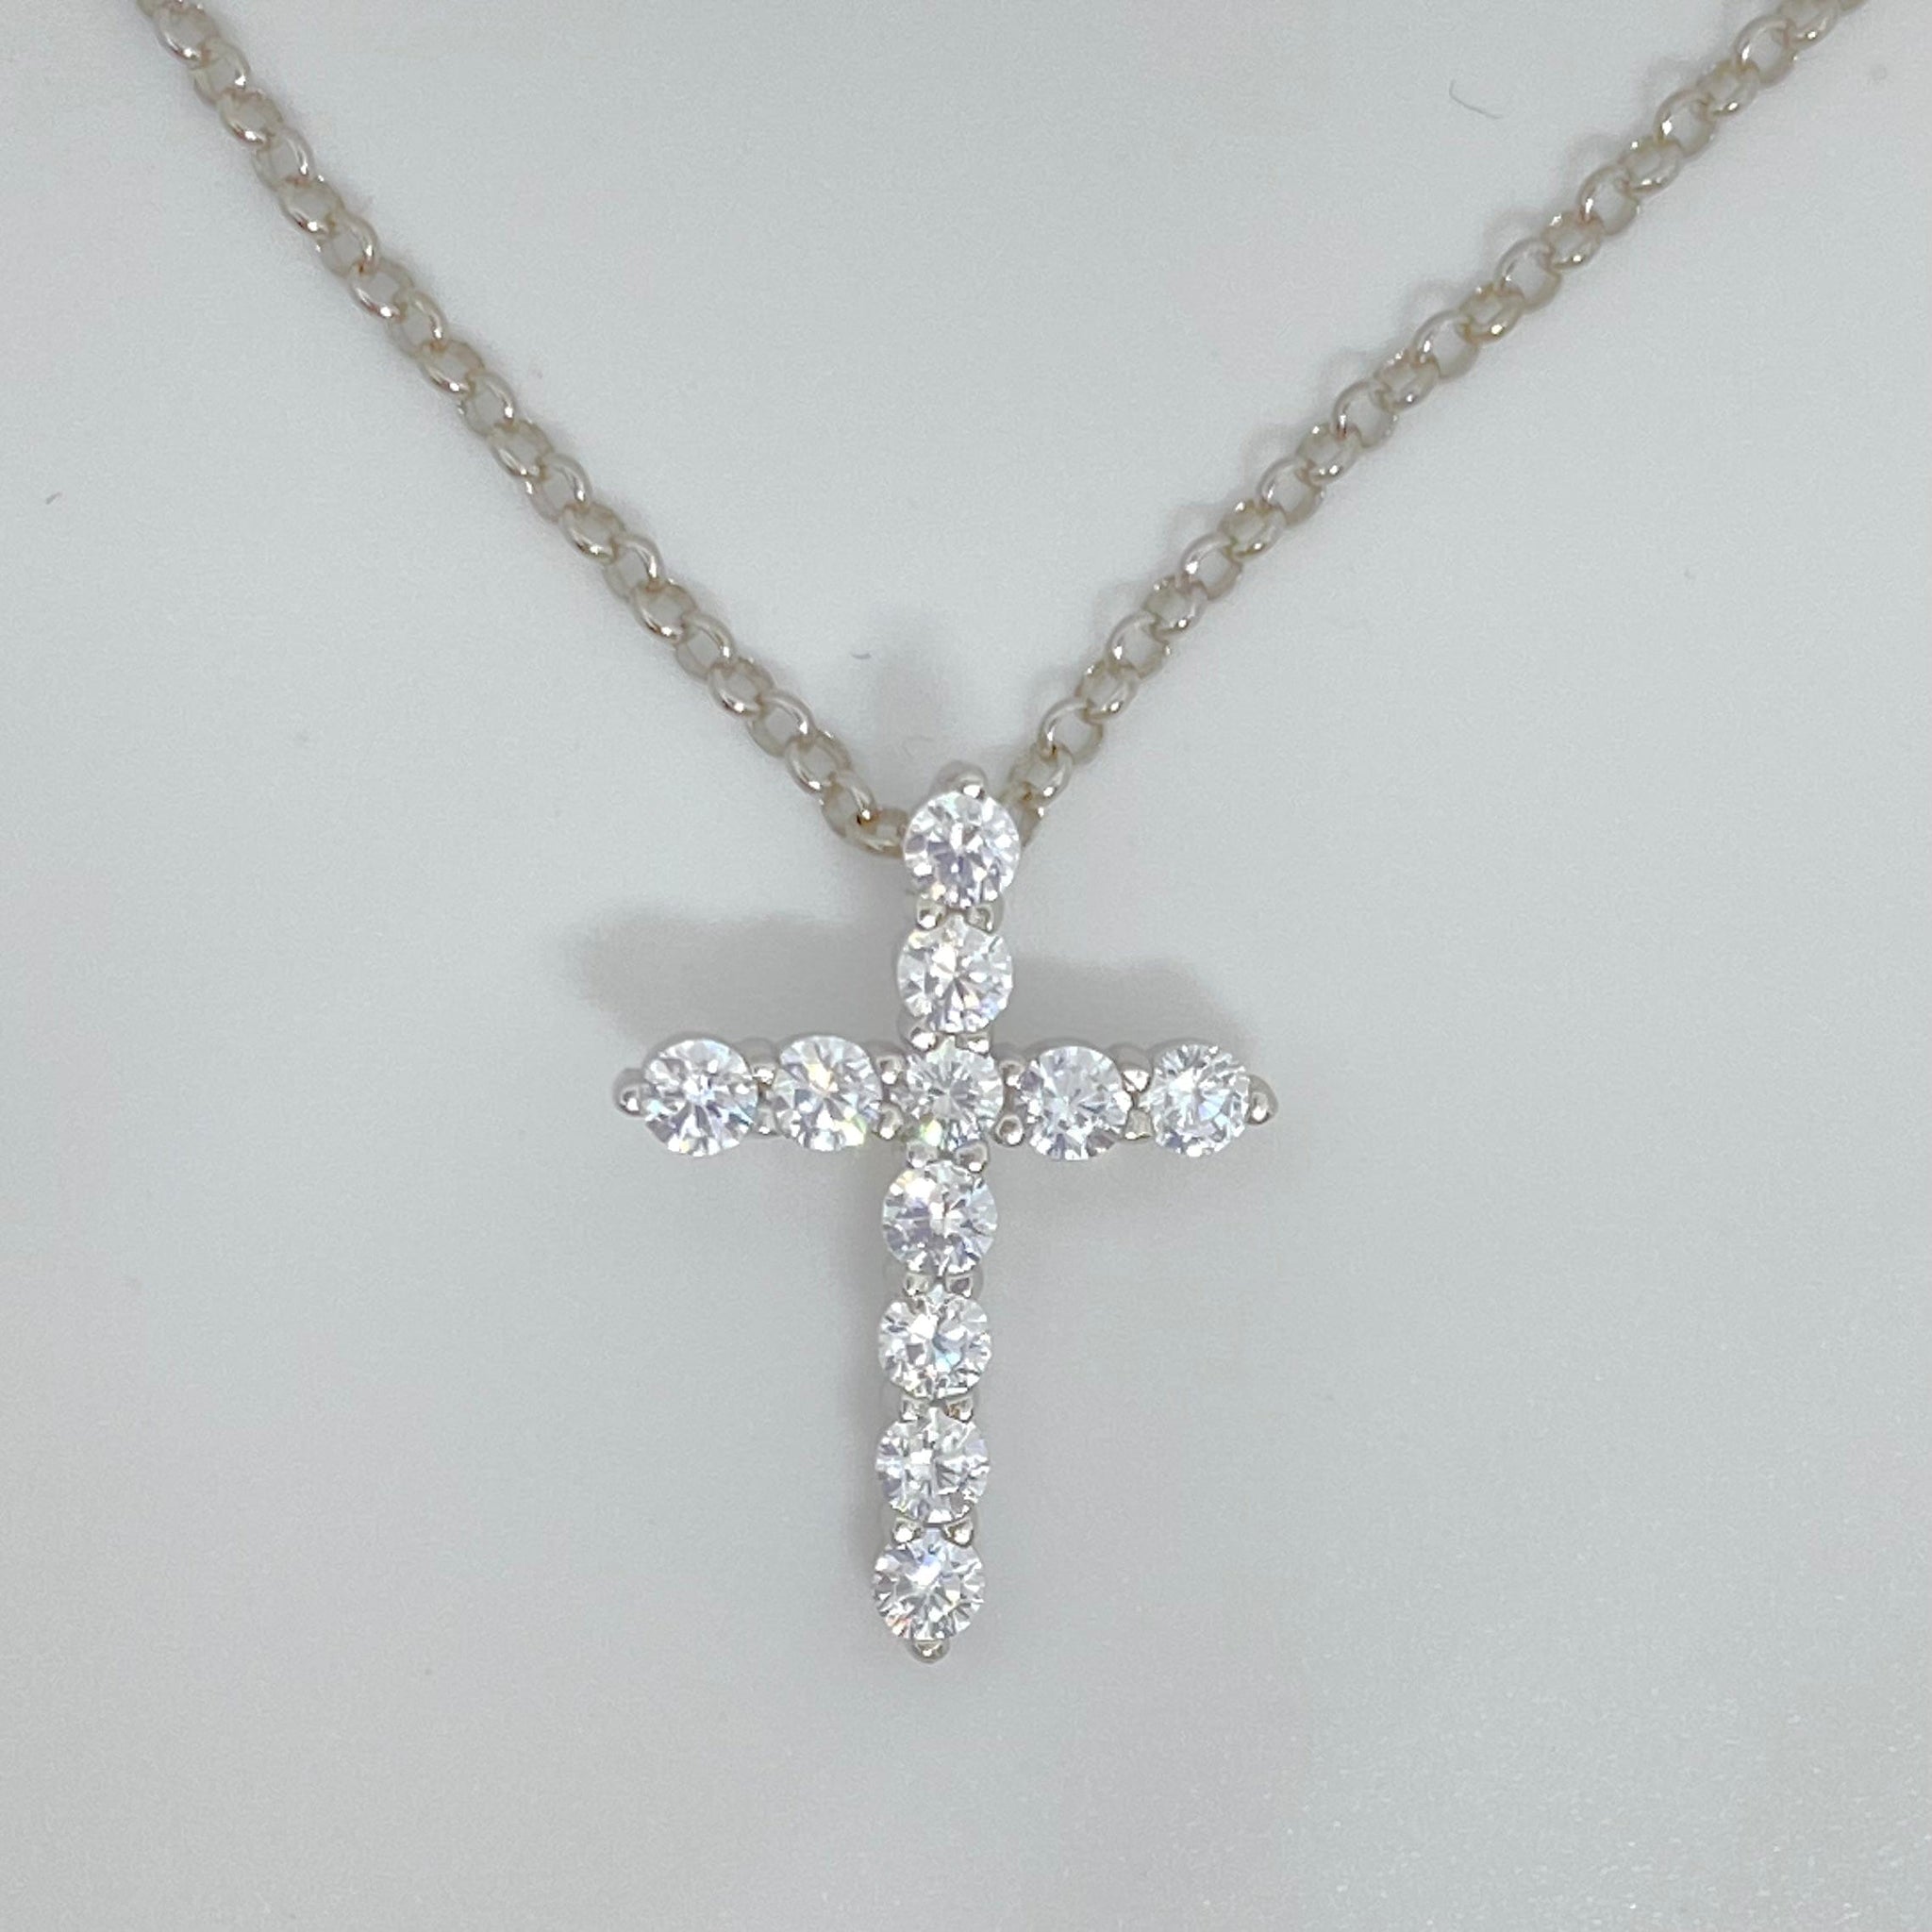 Vintage Tiffany & Co Sterling Silver Swiss Cross Pendant & Chain – QUEEN MAY